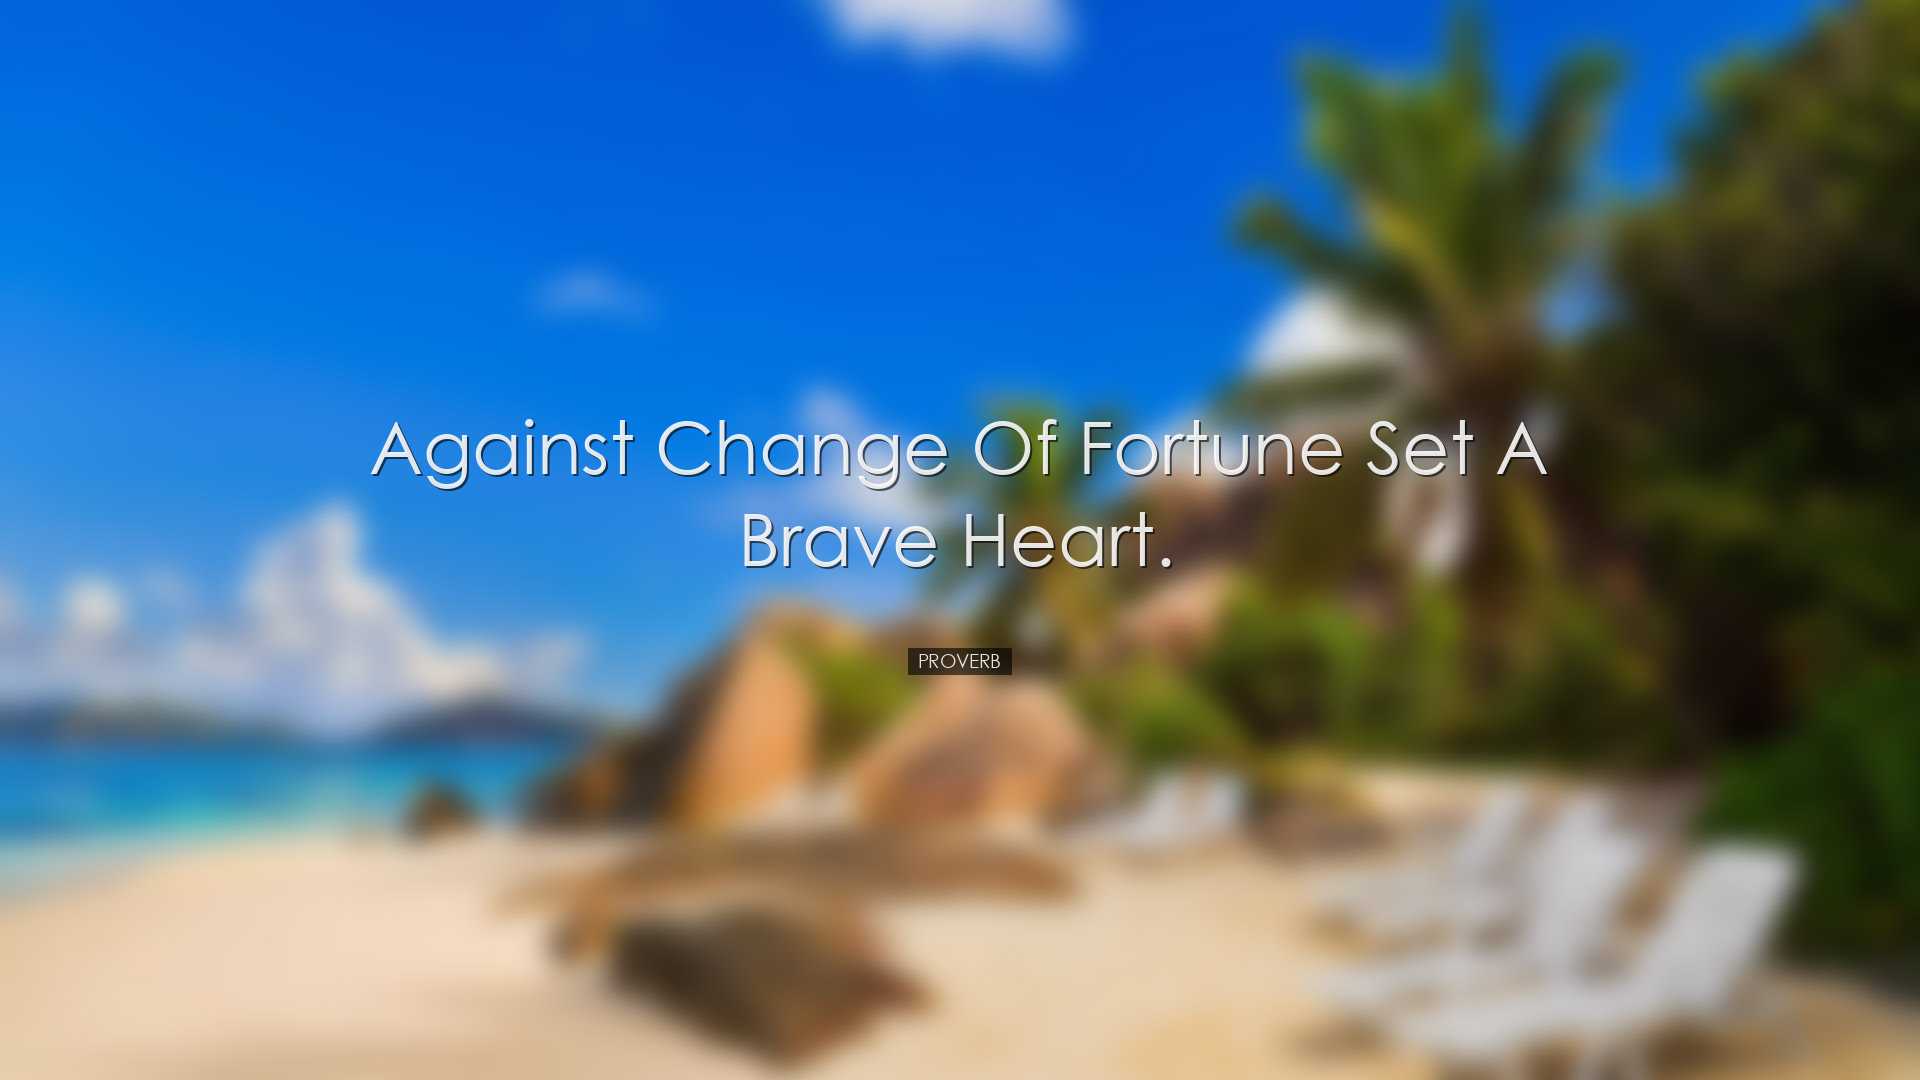 Against change of fortune set a brave heart. - Proverb